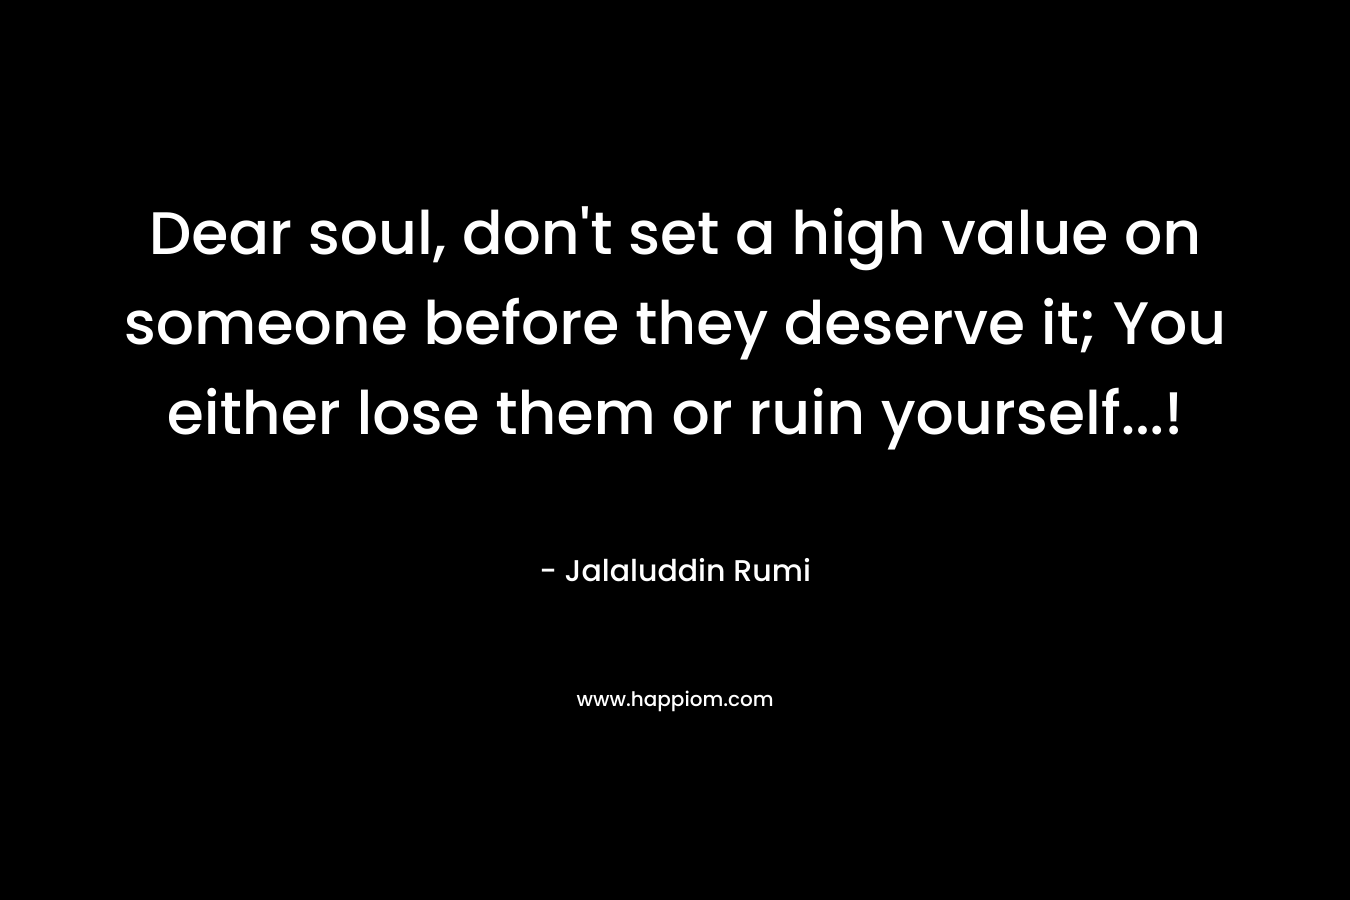 Dear soul, don't set a high value on someone before they deserve it; You either lose them or ruin yourself...!